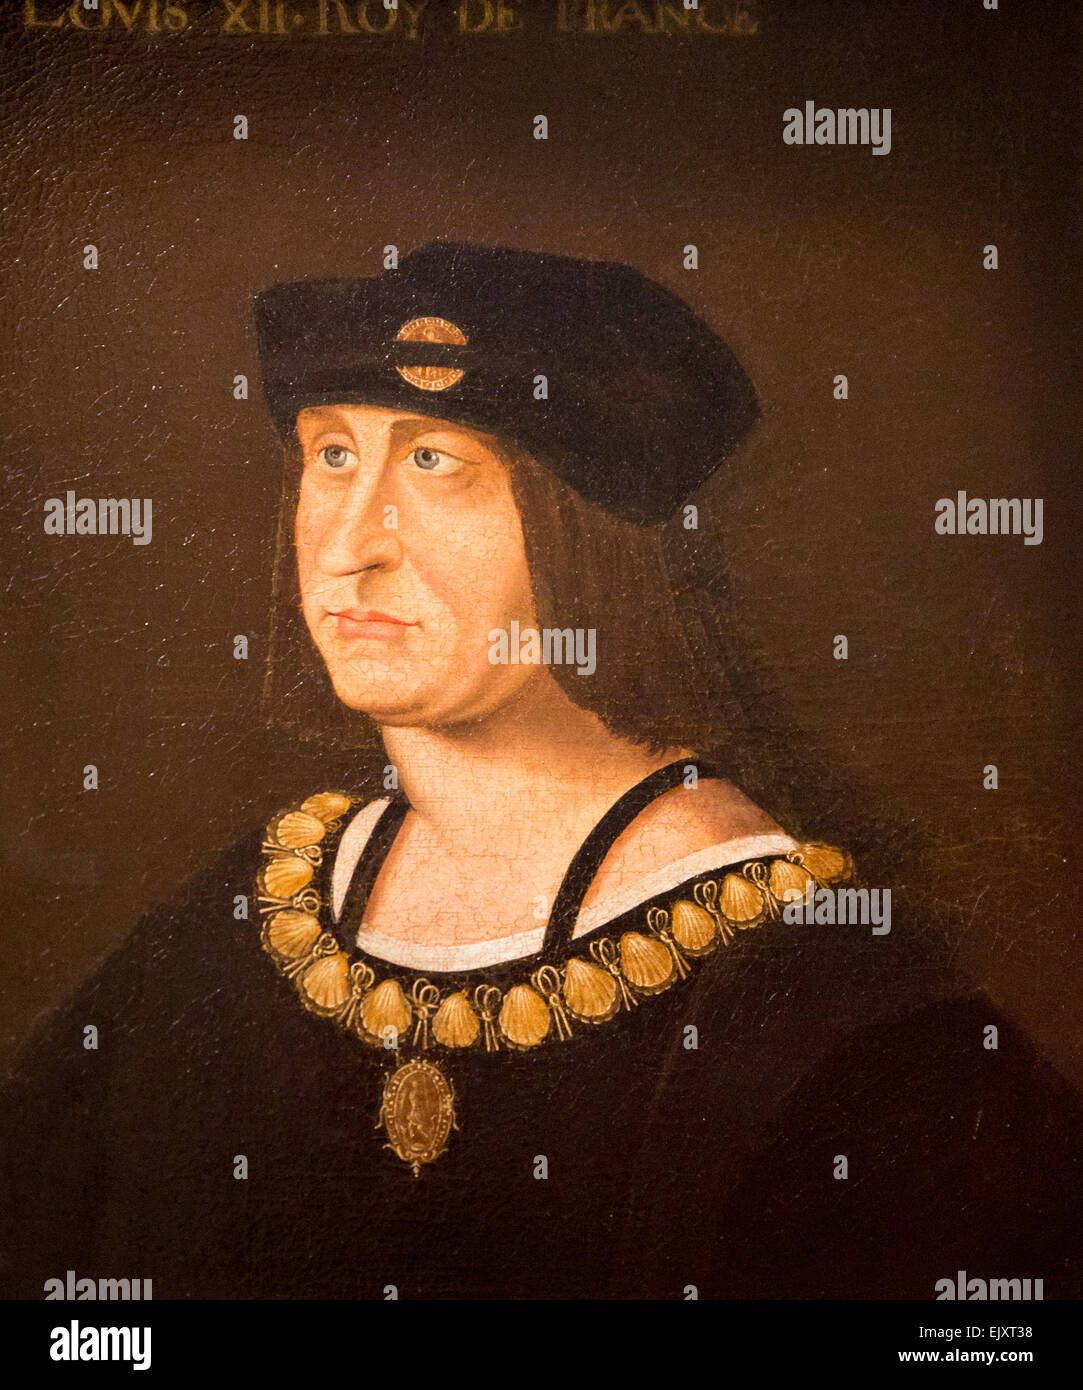 ActiveMuseum 0005723.jpg / Portrait of Louis XII, copy of the portrait in the collection of English monarchs since the beginning of the 16th and kept at Windsor Castle today 05/12/2013  -   / 17th century Collection / Active Museum Stock Photo